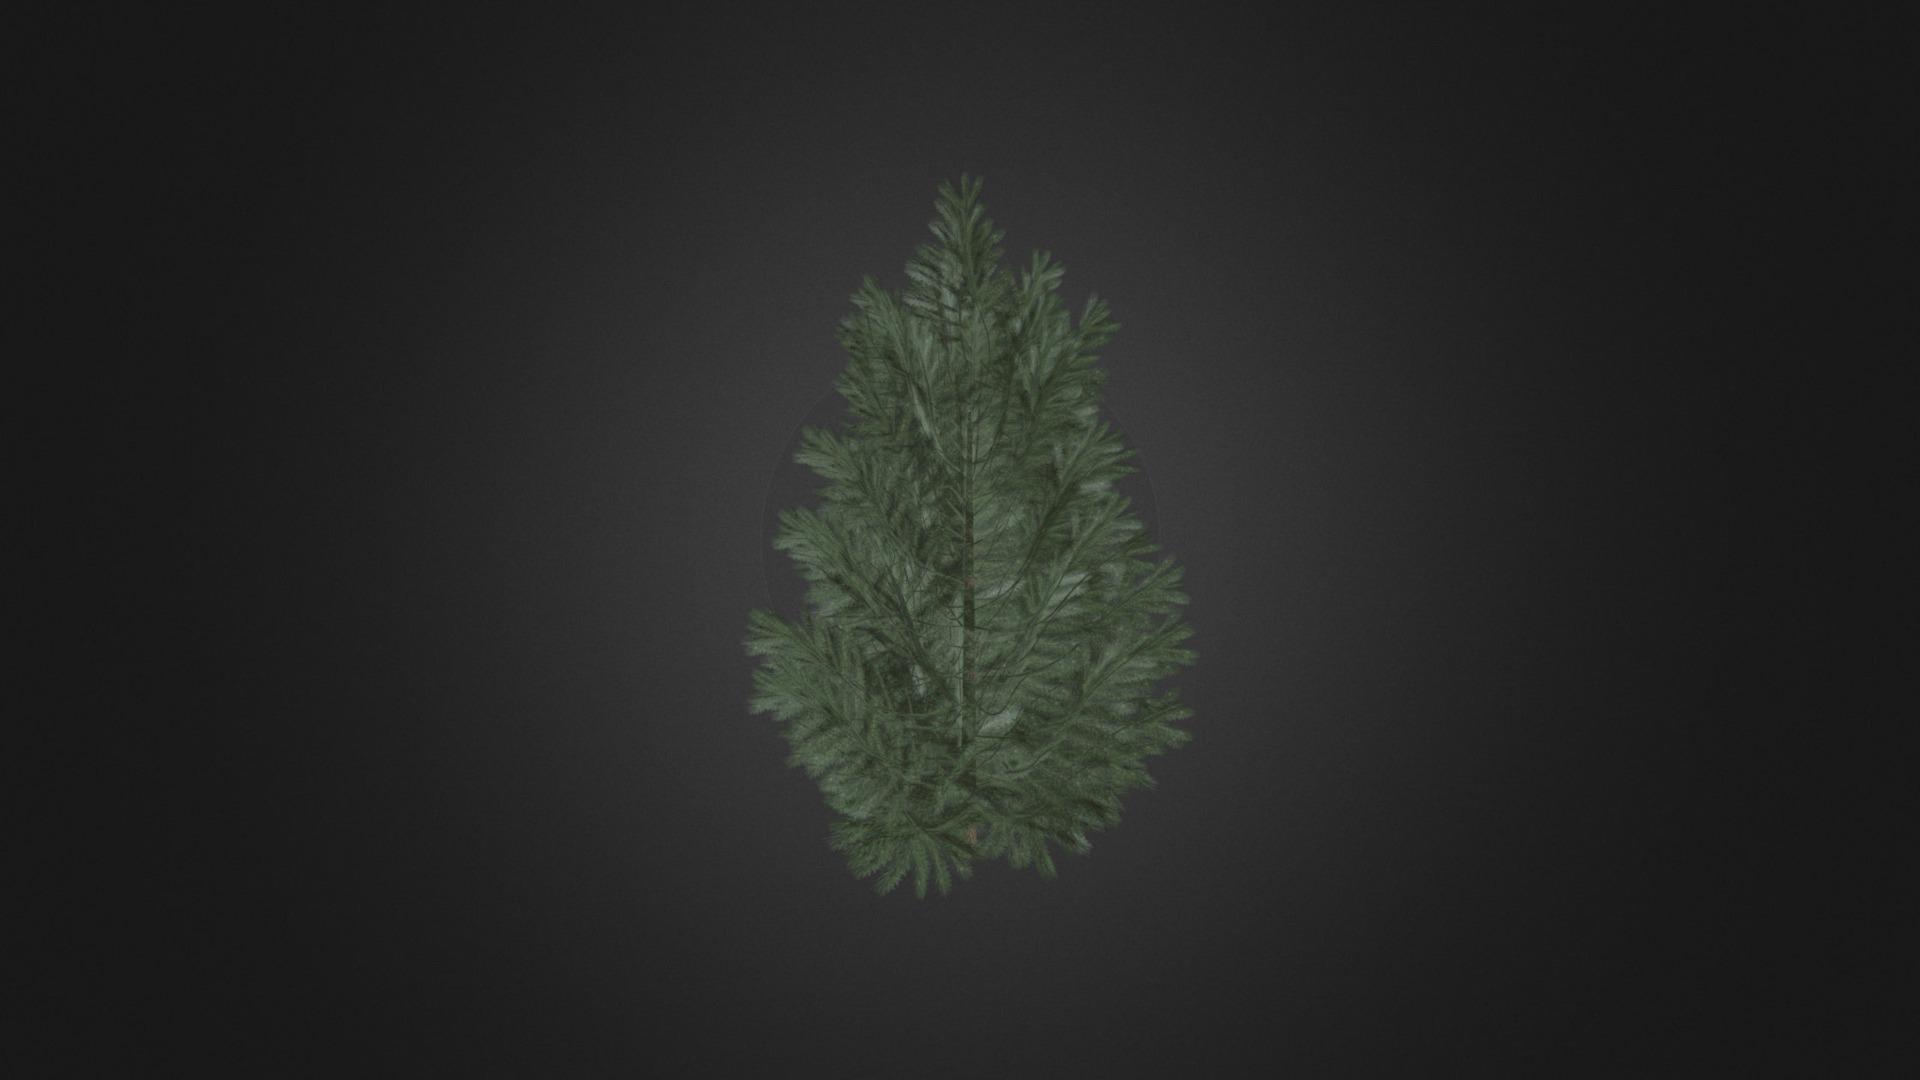 3D model European Black Pine 23 - This is a 3D model of the European Black Pine 23. The 3D model is about a tree with green leaves.